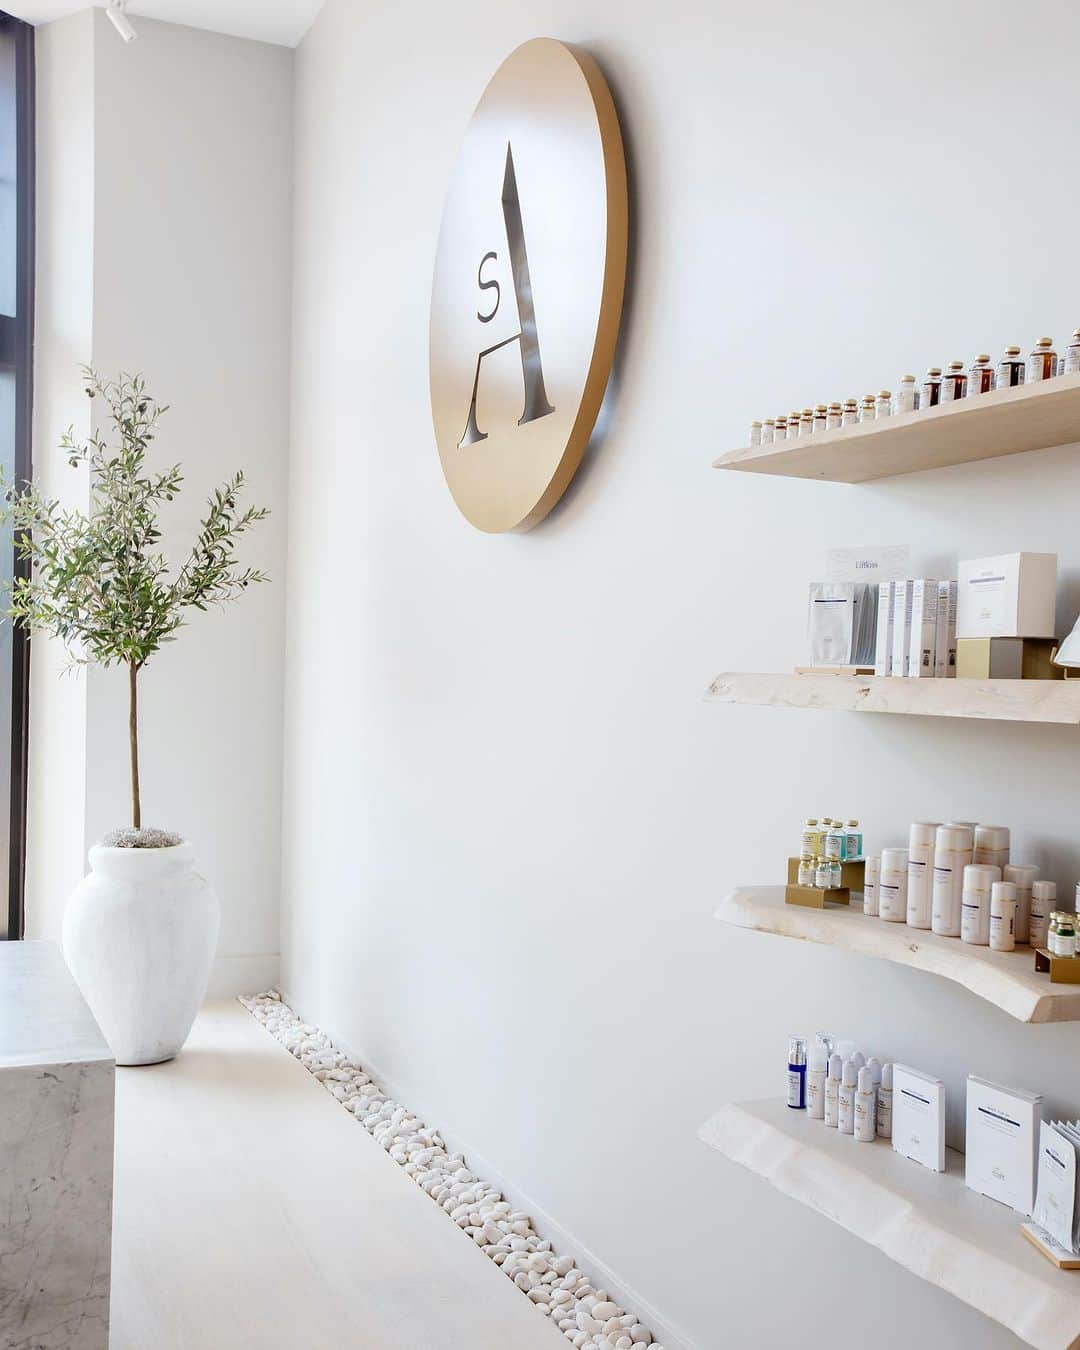 Biologique Recherche USAのインスタグラム：「Spa Partner spotlight ✨   Founded by Christine Ingram, Spa Azure has been a Biologique Recherche partner since 2010. With a location in Mount Pleasant and a stunning new space that opened in the downtown Charleston area in 2022, the European spa boutique was the first to bring our products and face & body treatments to South Carolina.   The spa’s dedication to an individualized approach utilizing the most innovative treatments available helps clients achieve the difference they want to see in their skin. @spaazure facials have become some of the most sought-after age-defying treatments in the country.   Ingram, a Charleston resident since 2003, is a hands-on owner and operator that takes great pride in developing a professional, knowledgeable, and well-trained staff that is committed to providing clients with the finest skincare treatments.   “We are honored to carry Biologique Recherche skincare, as it is truly the most effective skincare in the world. The market is saturated with unauthentic products, so working with a genuine skincare line like Biologique Recherche is a privilege for us all at Spa Azure.”   Spa Azure was the recipient of our 2022 Biologique Recherche Ambassador of the Year award, celebrating a spa that consistently showcases best in class brand expression and execution.   We are proud to partner with you, @spaazure 🤍  #BiologiqueRecherche #FollowYourSkinInstant #BuildingBetterSkin #BRspa #charlestonspa #SpaAzure」